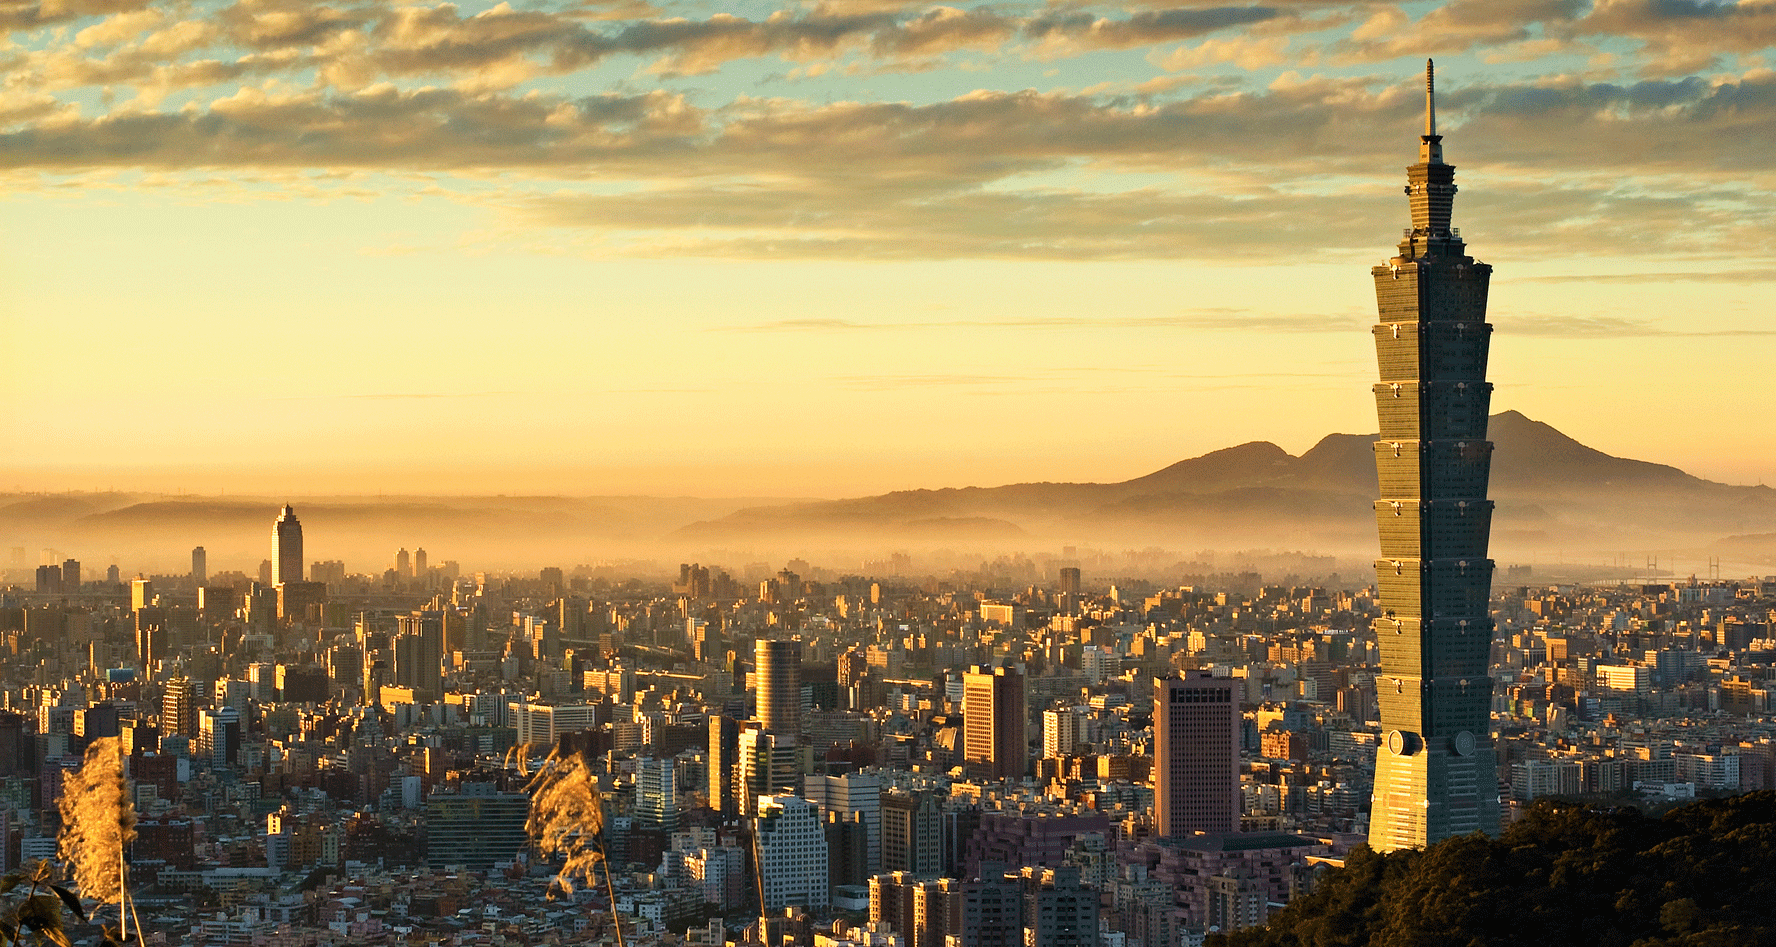 Taiwan skyline background for Production